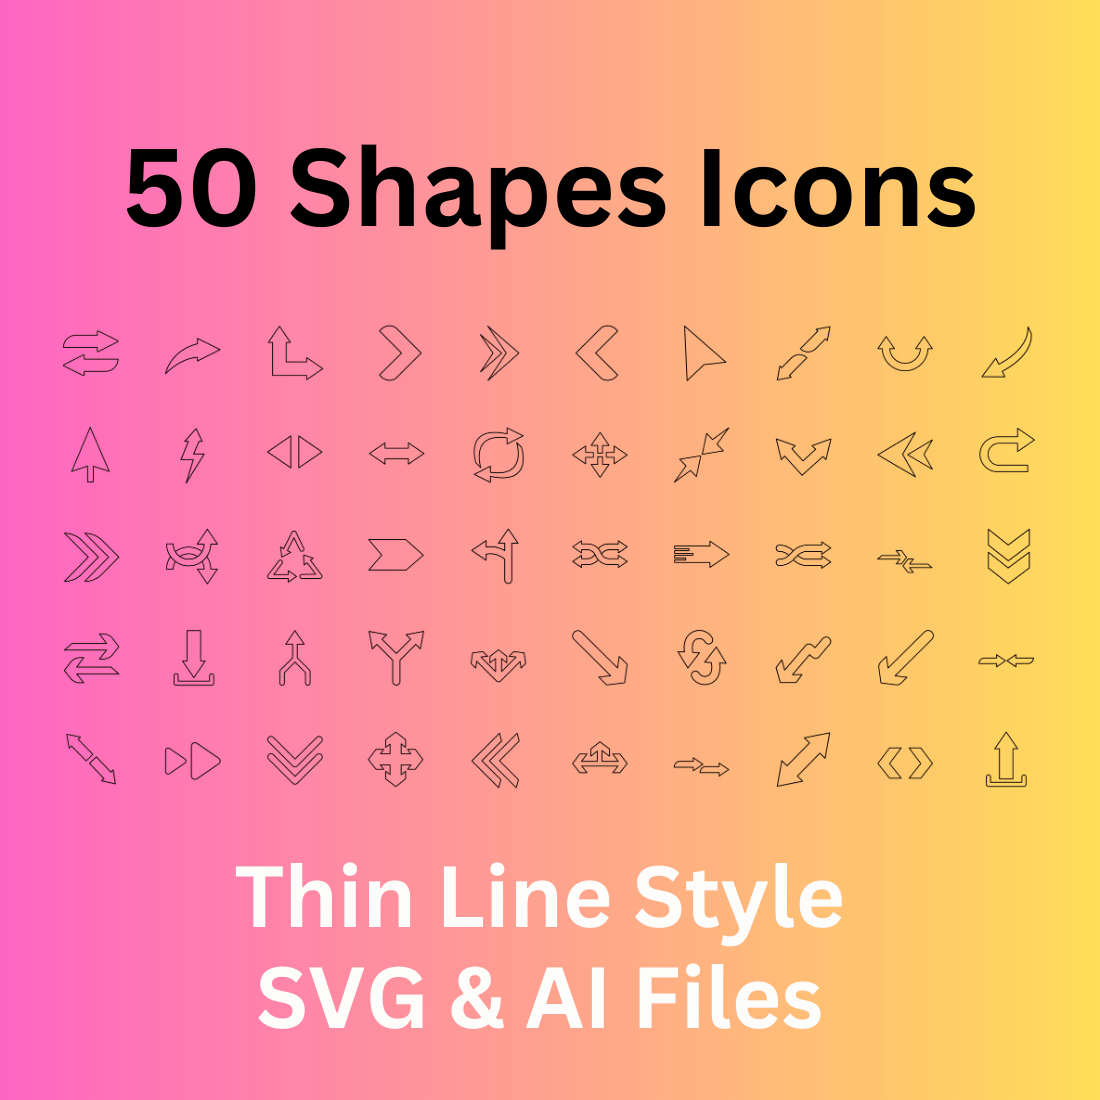 Shapes Icon Set 50 Outline Icons - SVG And AI Files cover image.